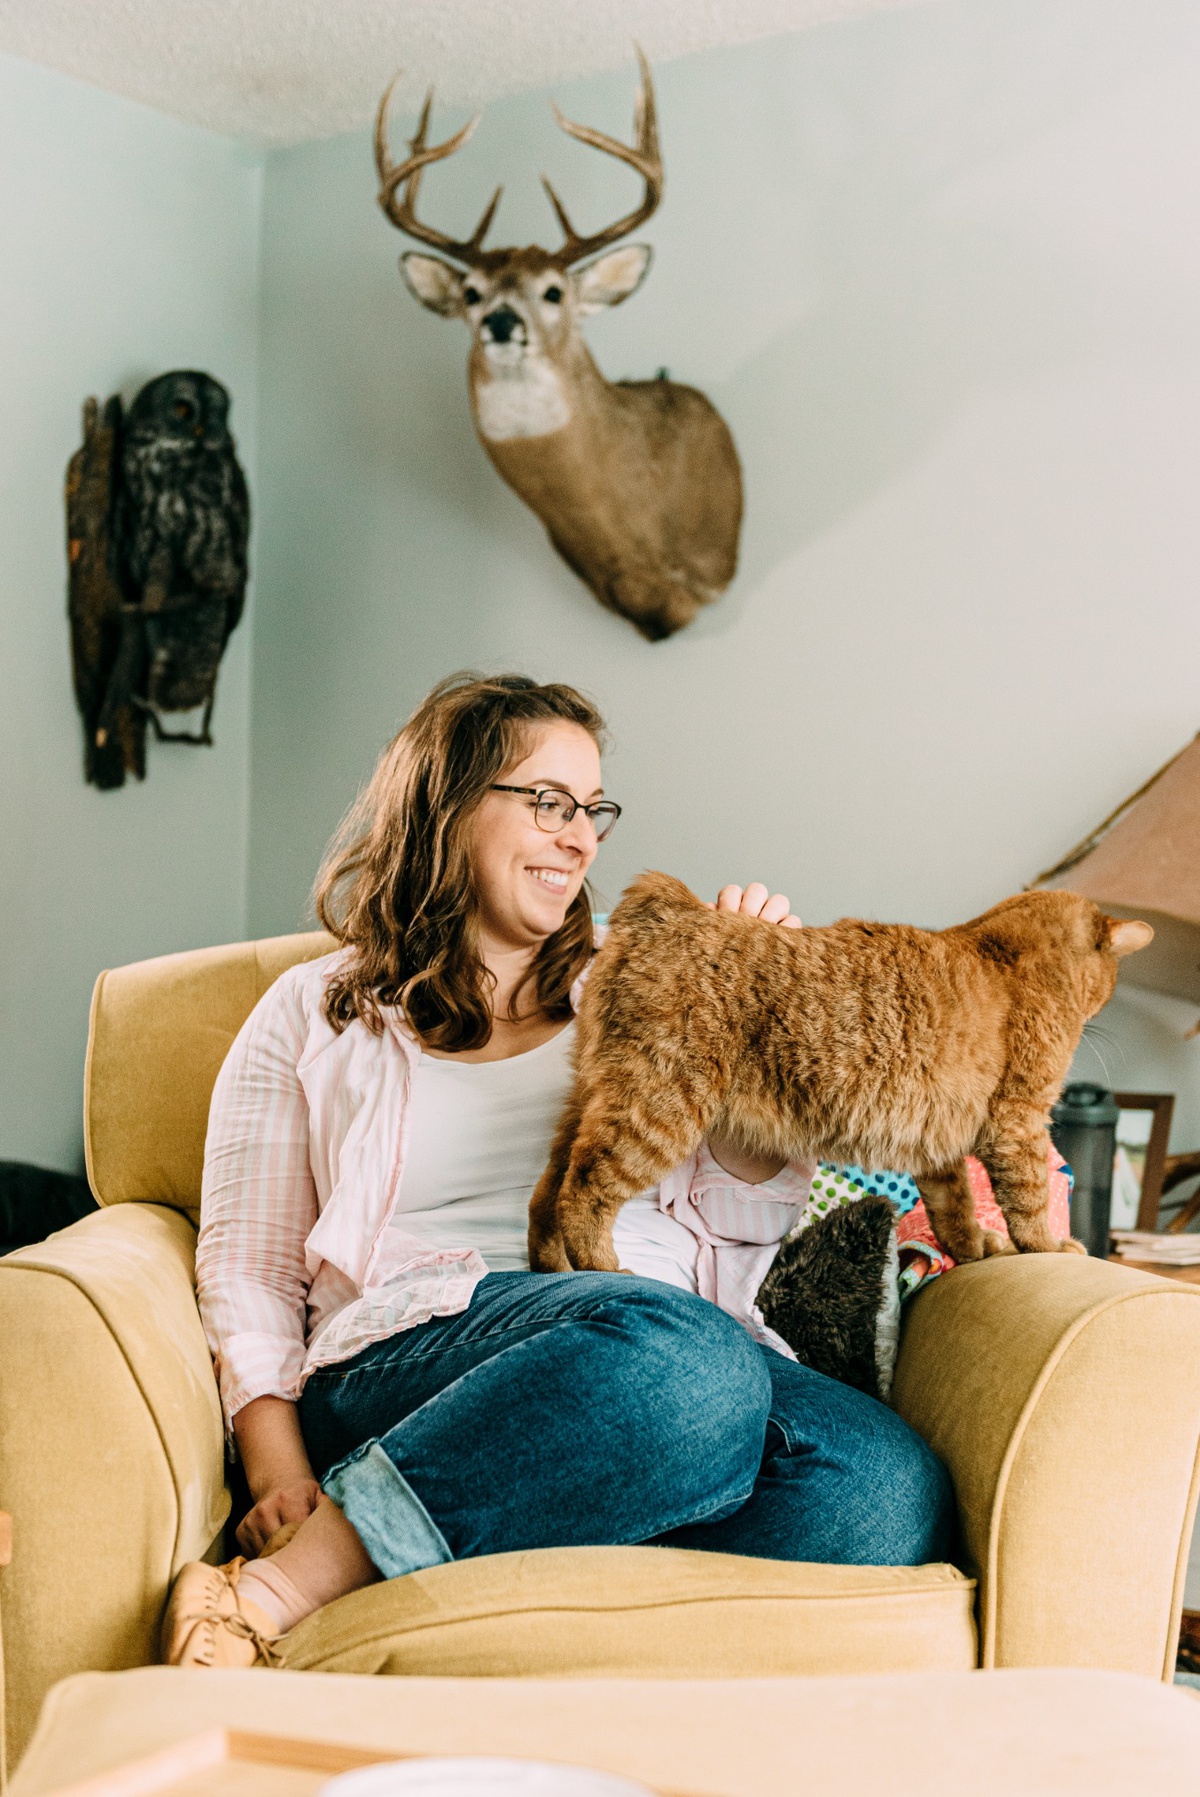 A smiling woman in a cozy indoor setting, interacting with a cat, with rustic decor that includes a mounted deer head on the wall.